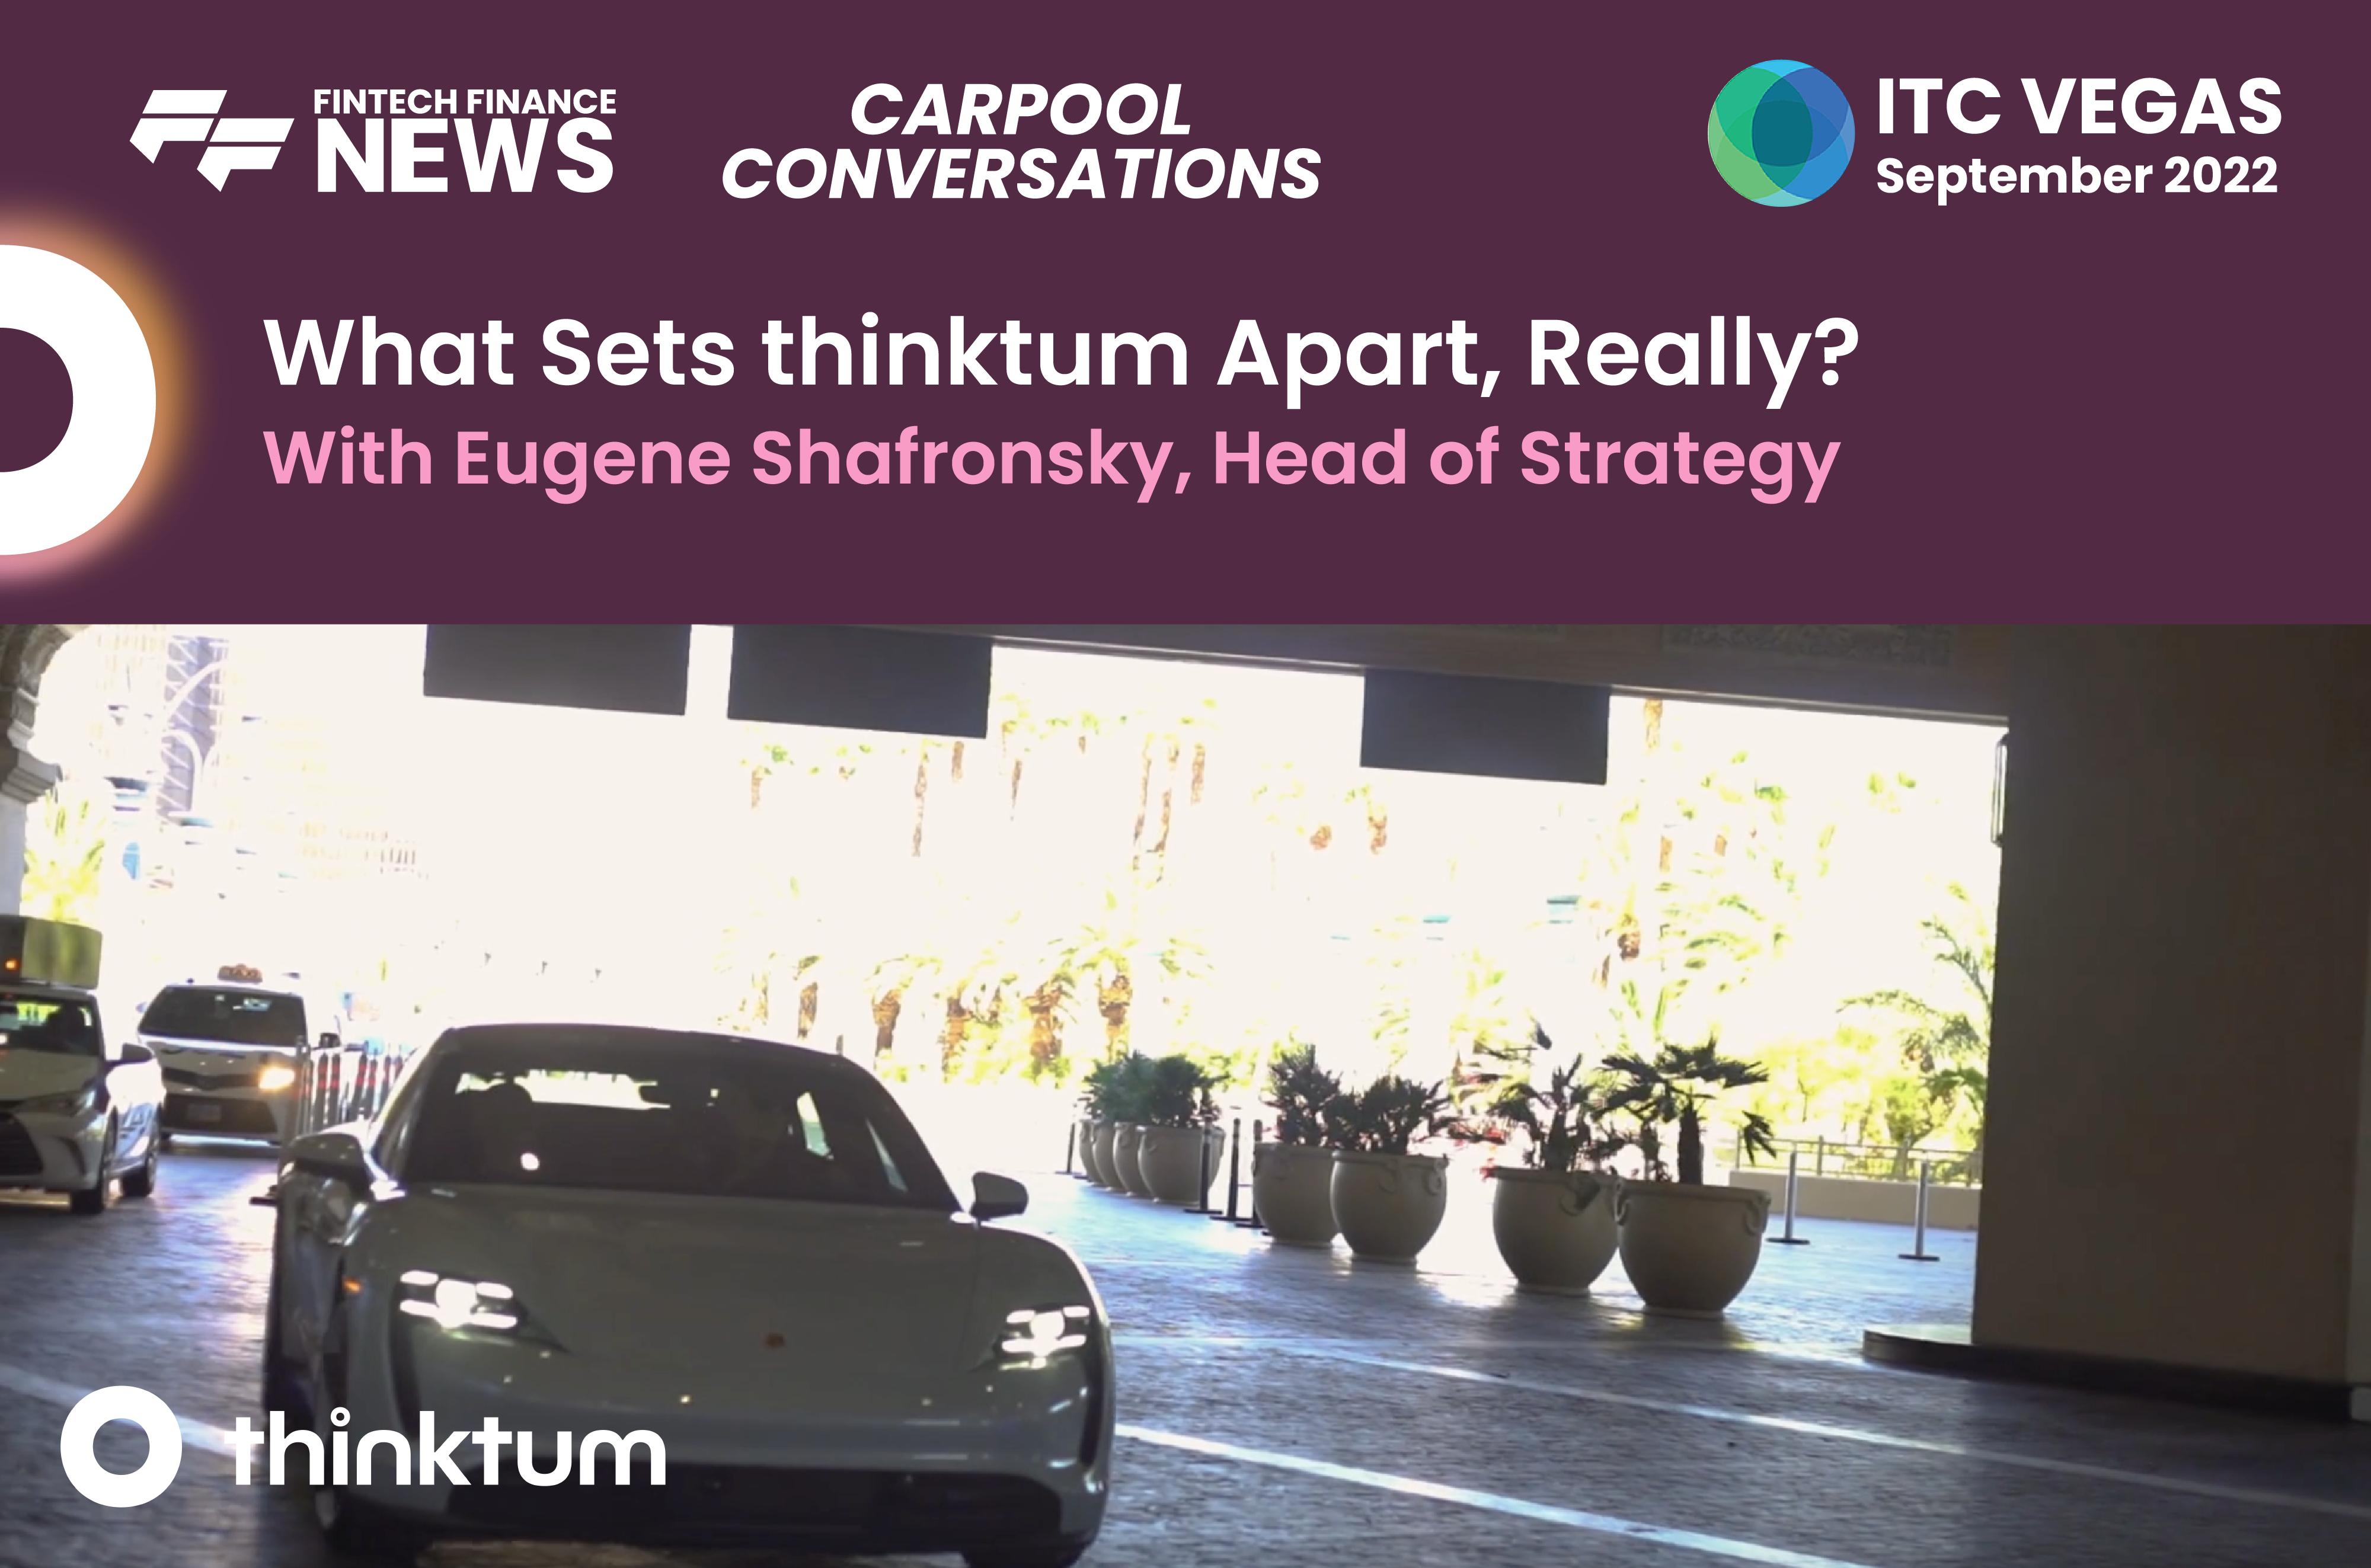 Ad for a carpool conversation interview with Eugene Shafronsky, Head of Strategy and the title What Sets thinktum Apart, Really along with ITC, thinktum and FF News logos.